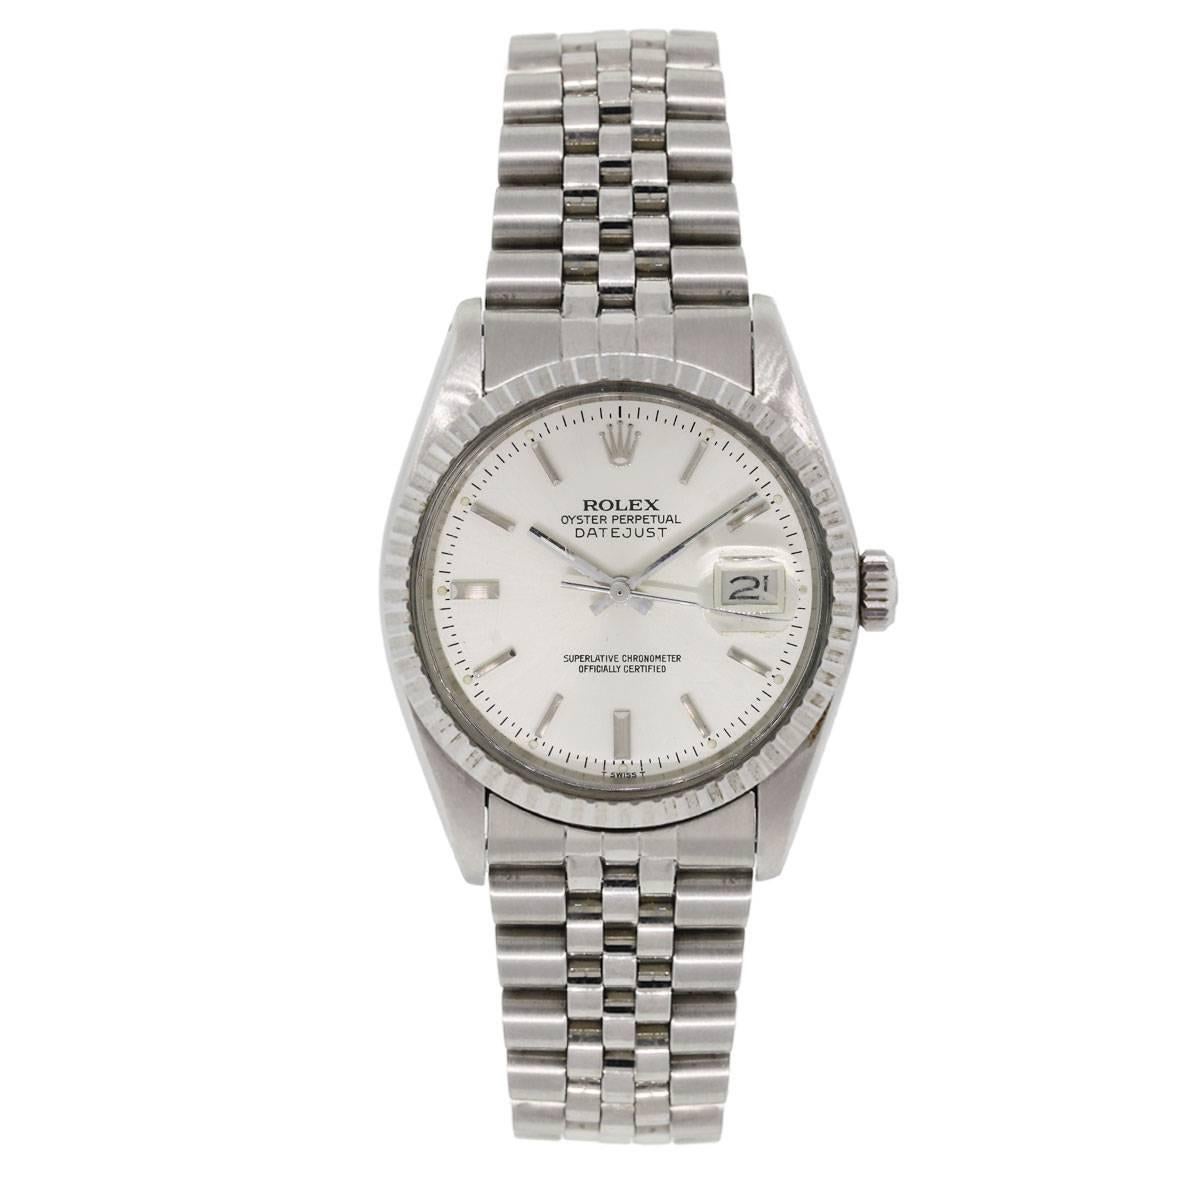 Brand: Role x
MPN: 16030
Model: Datejust
Case Material: 
Case Diameter: 36mm
Crystal: Scratch resistant sapphire
Bezel: Stainless steel engine turned bezel
Dial: Silver stick dial with date window at the 3 o’clock position
Bracelet: Stainless steel